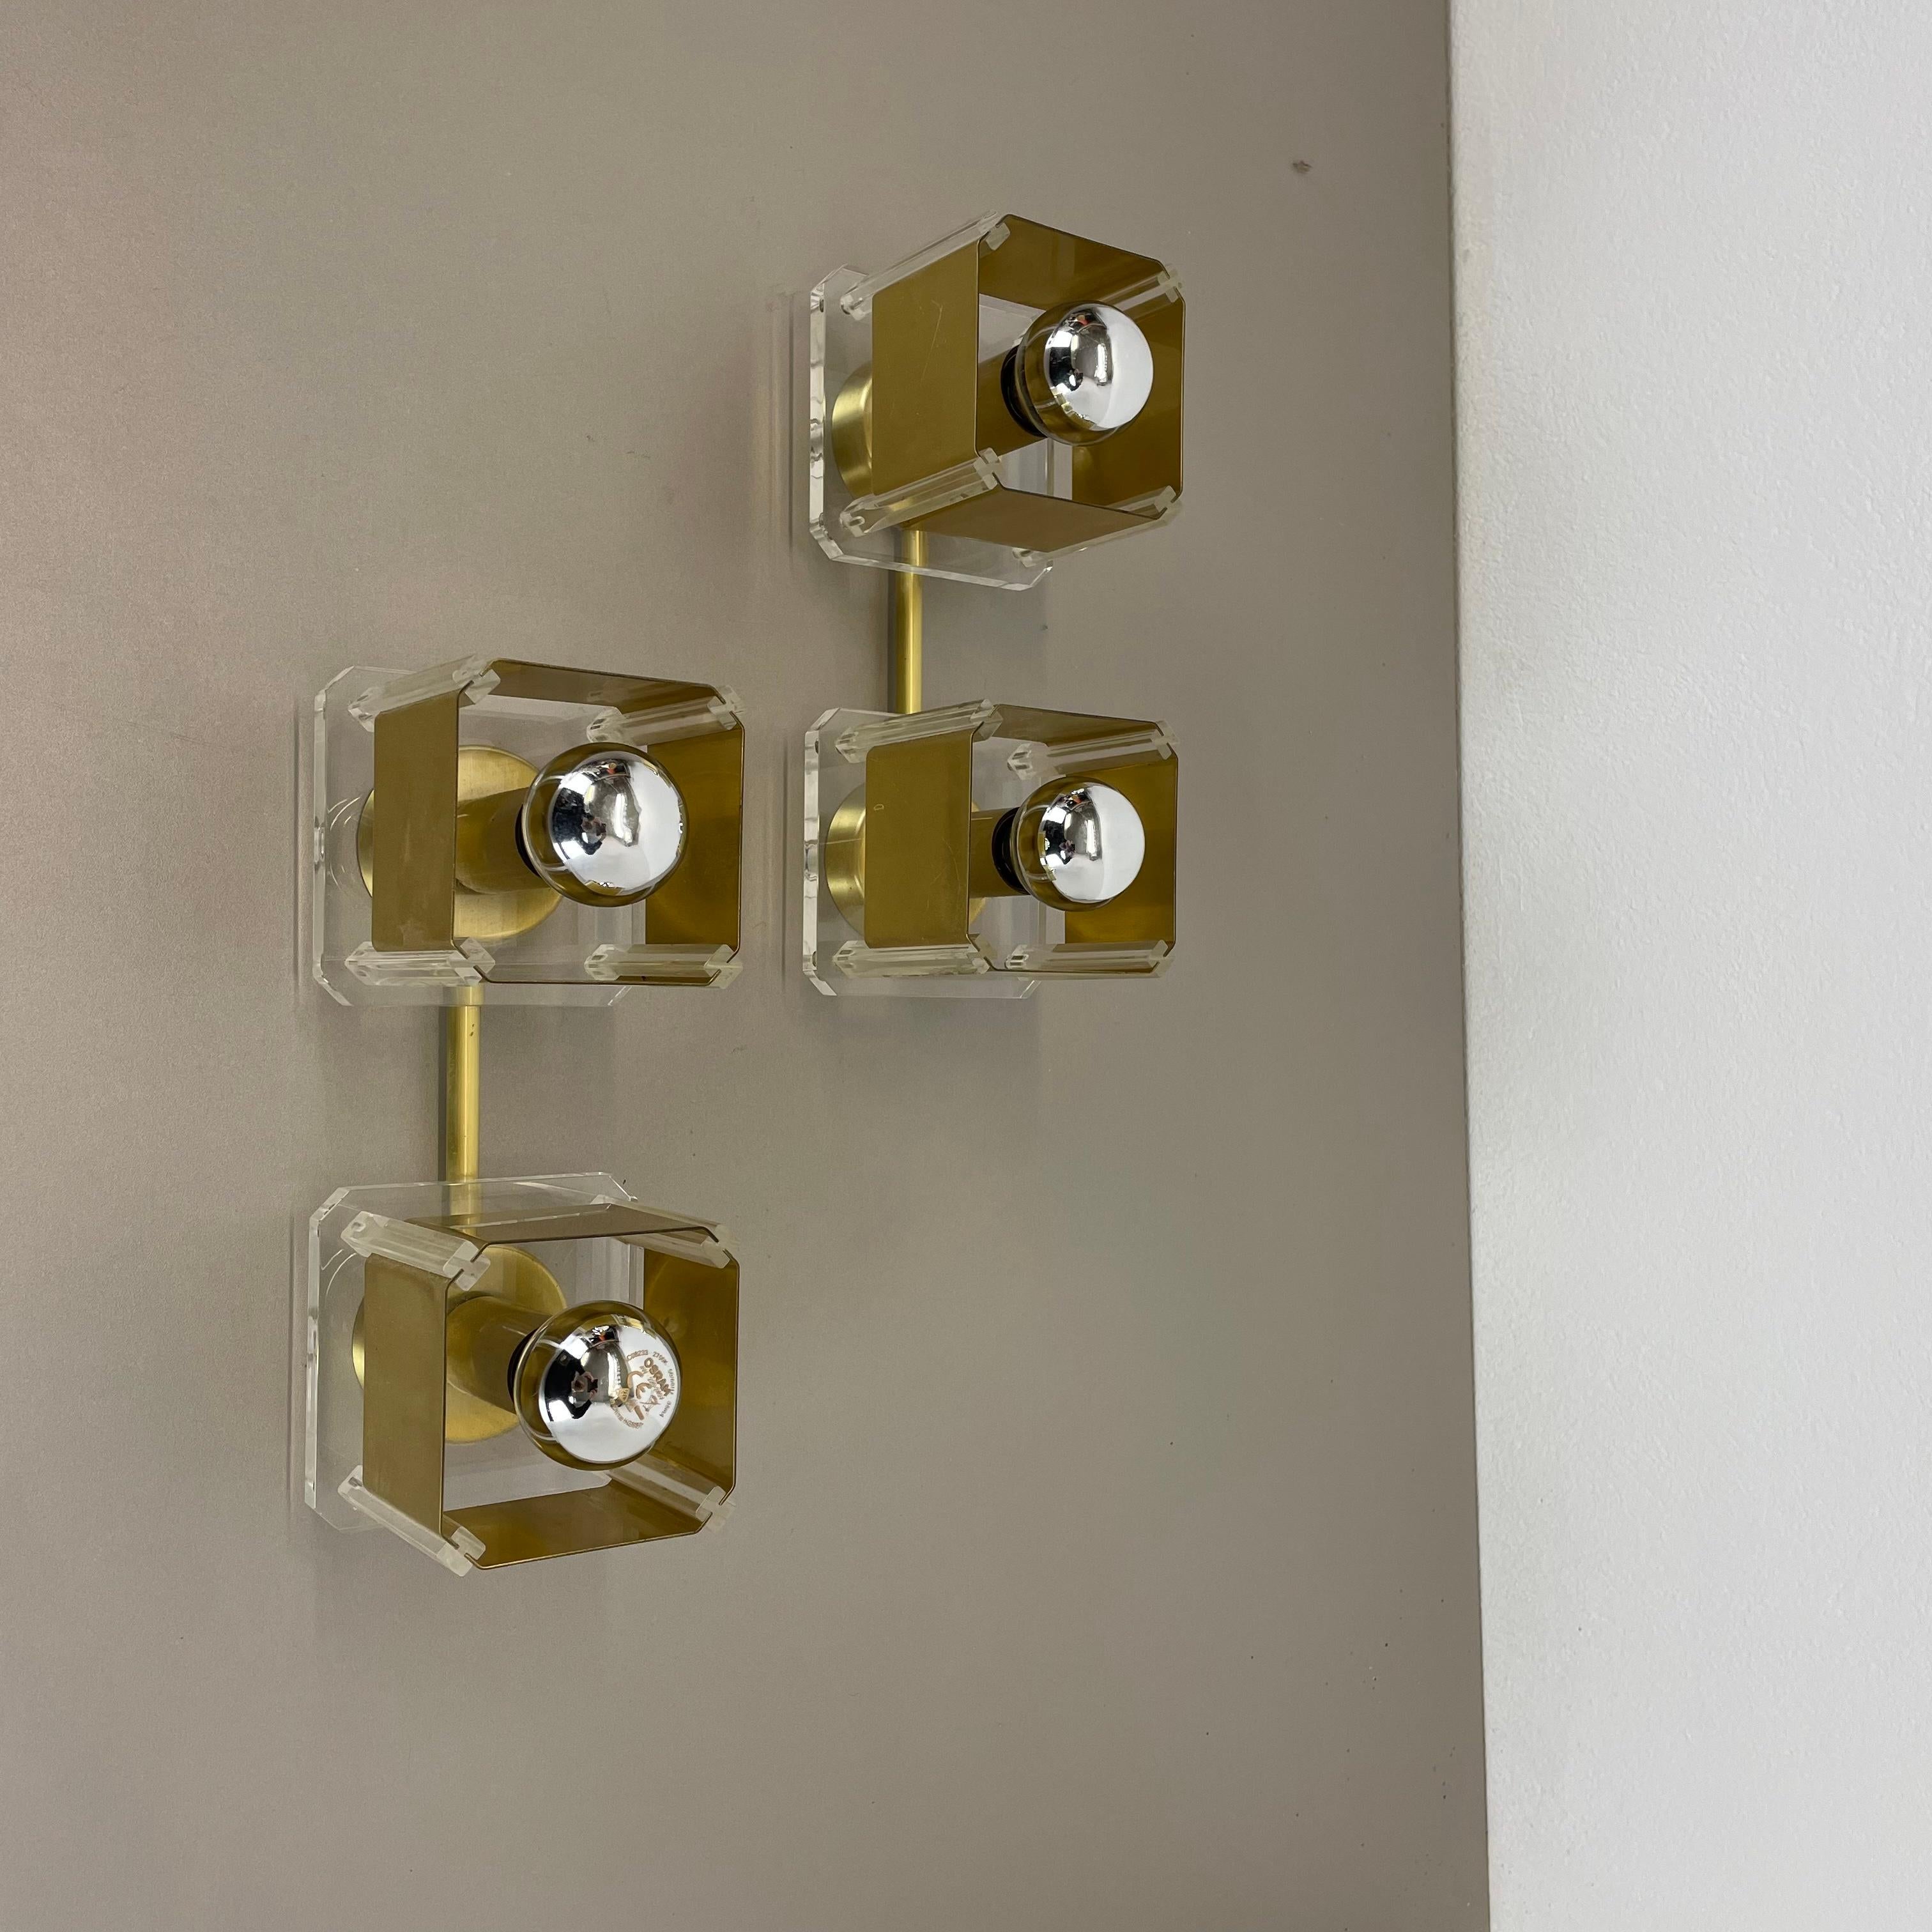 Article:

Wall light, set of 2 


Origin:

Italy



Age:

1970s



This modernist light set was produced in Italy in the 1970s in Italy. It is made of brass and acryl lucid glass. It features a very unique and unusual Brutalist